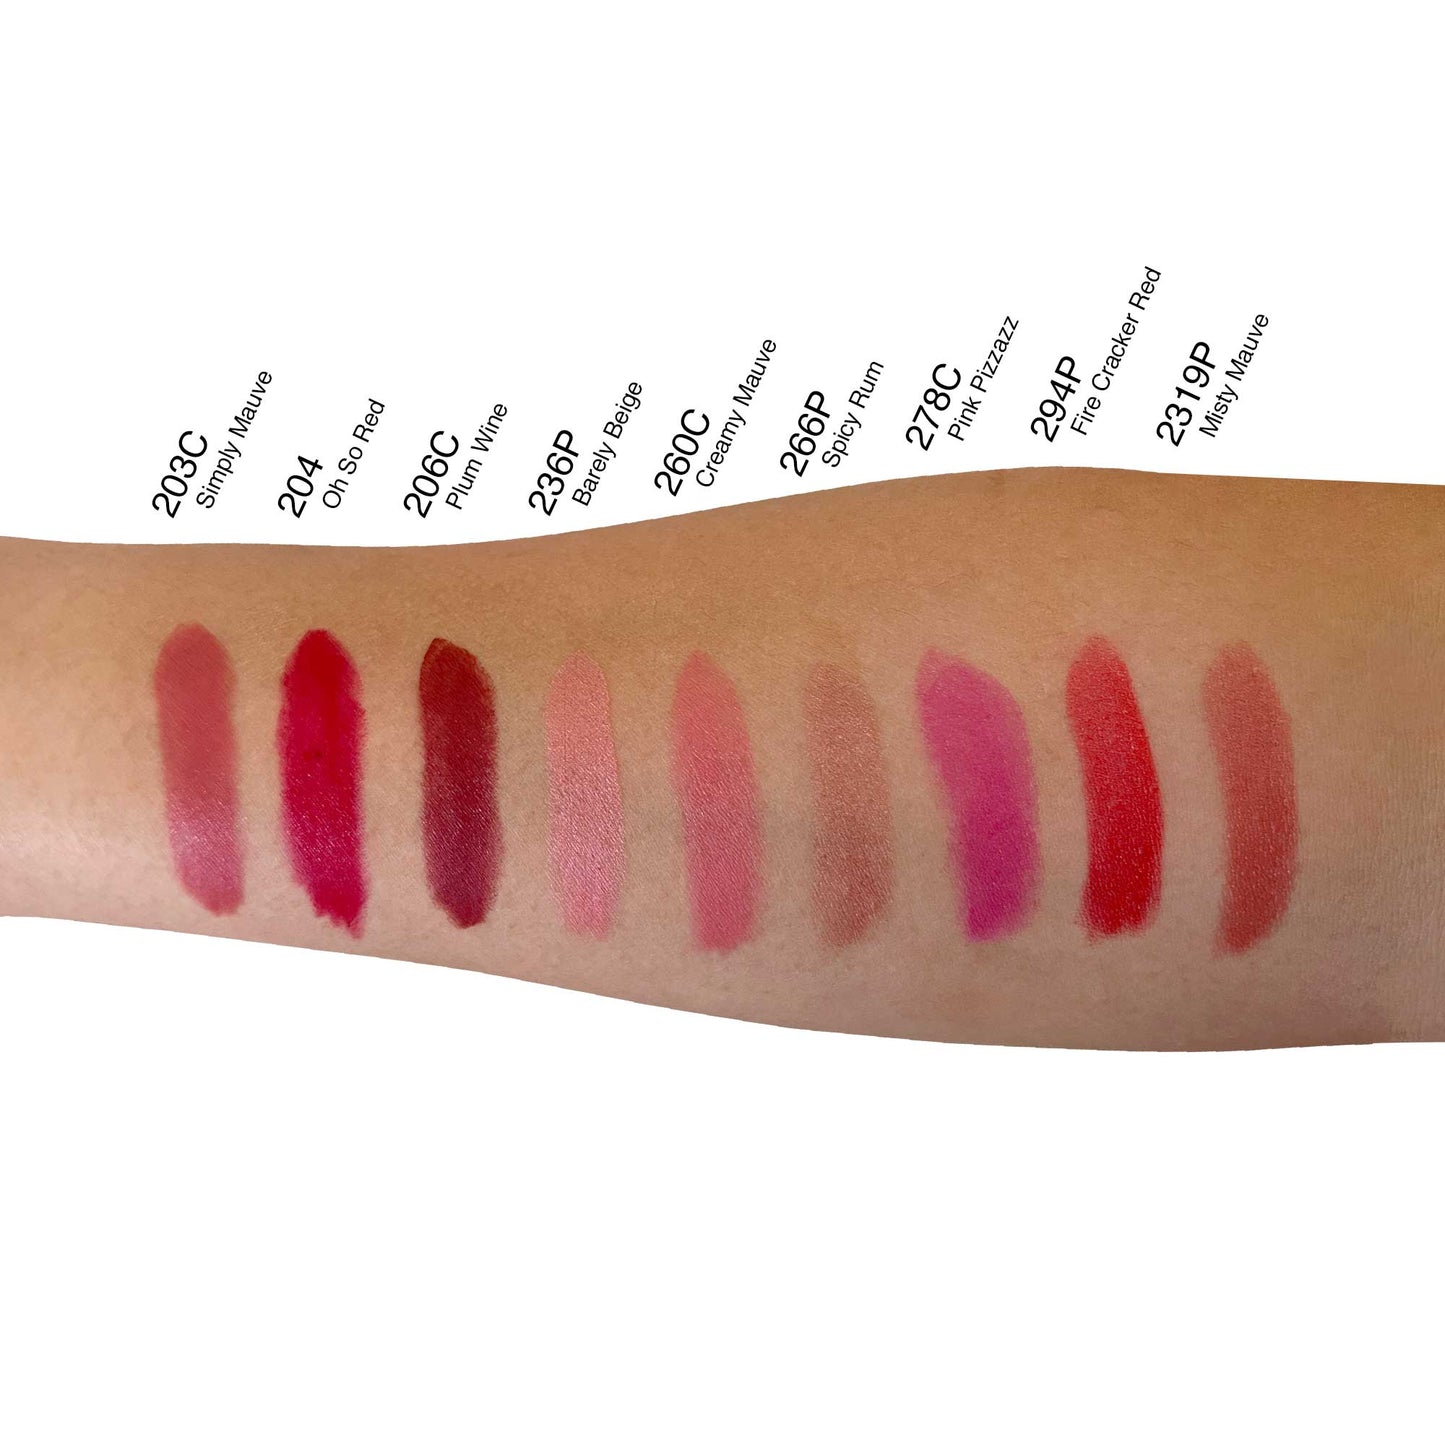 Enhance your make-up routine with Cruisin Organics lipstick collections.